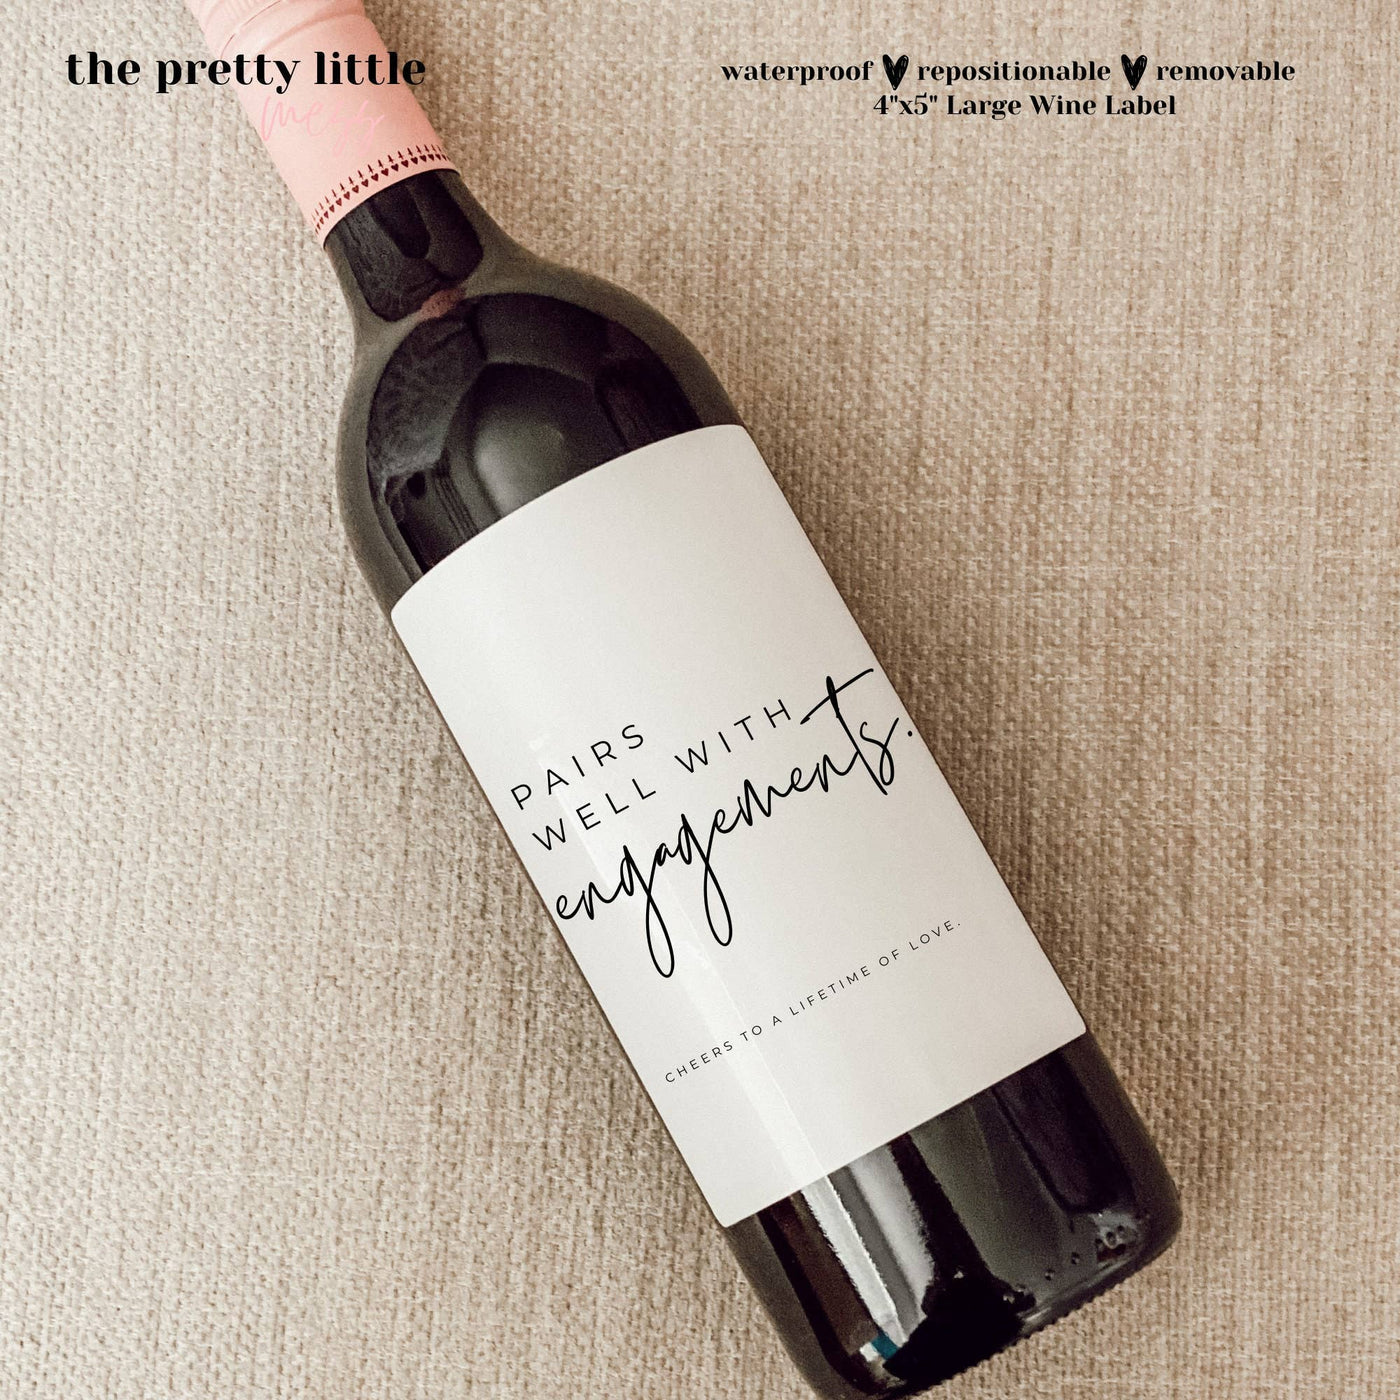 Engagement Wine Label, Pairs Well with Engagements